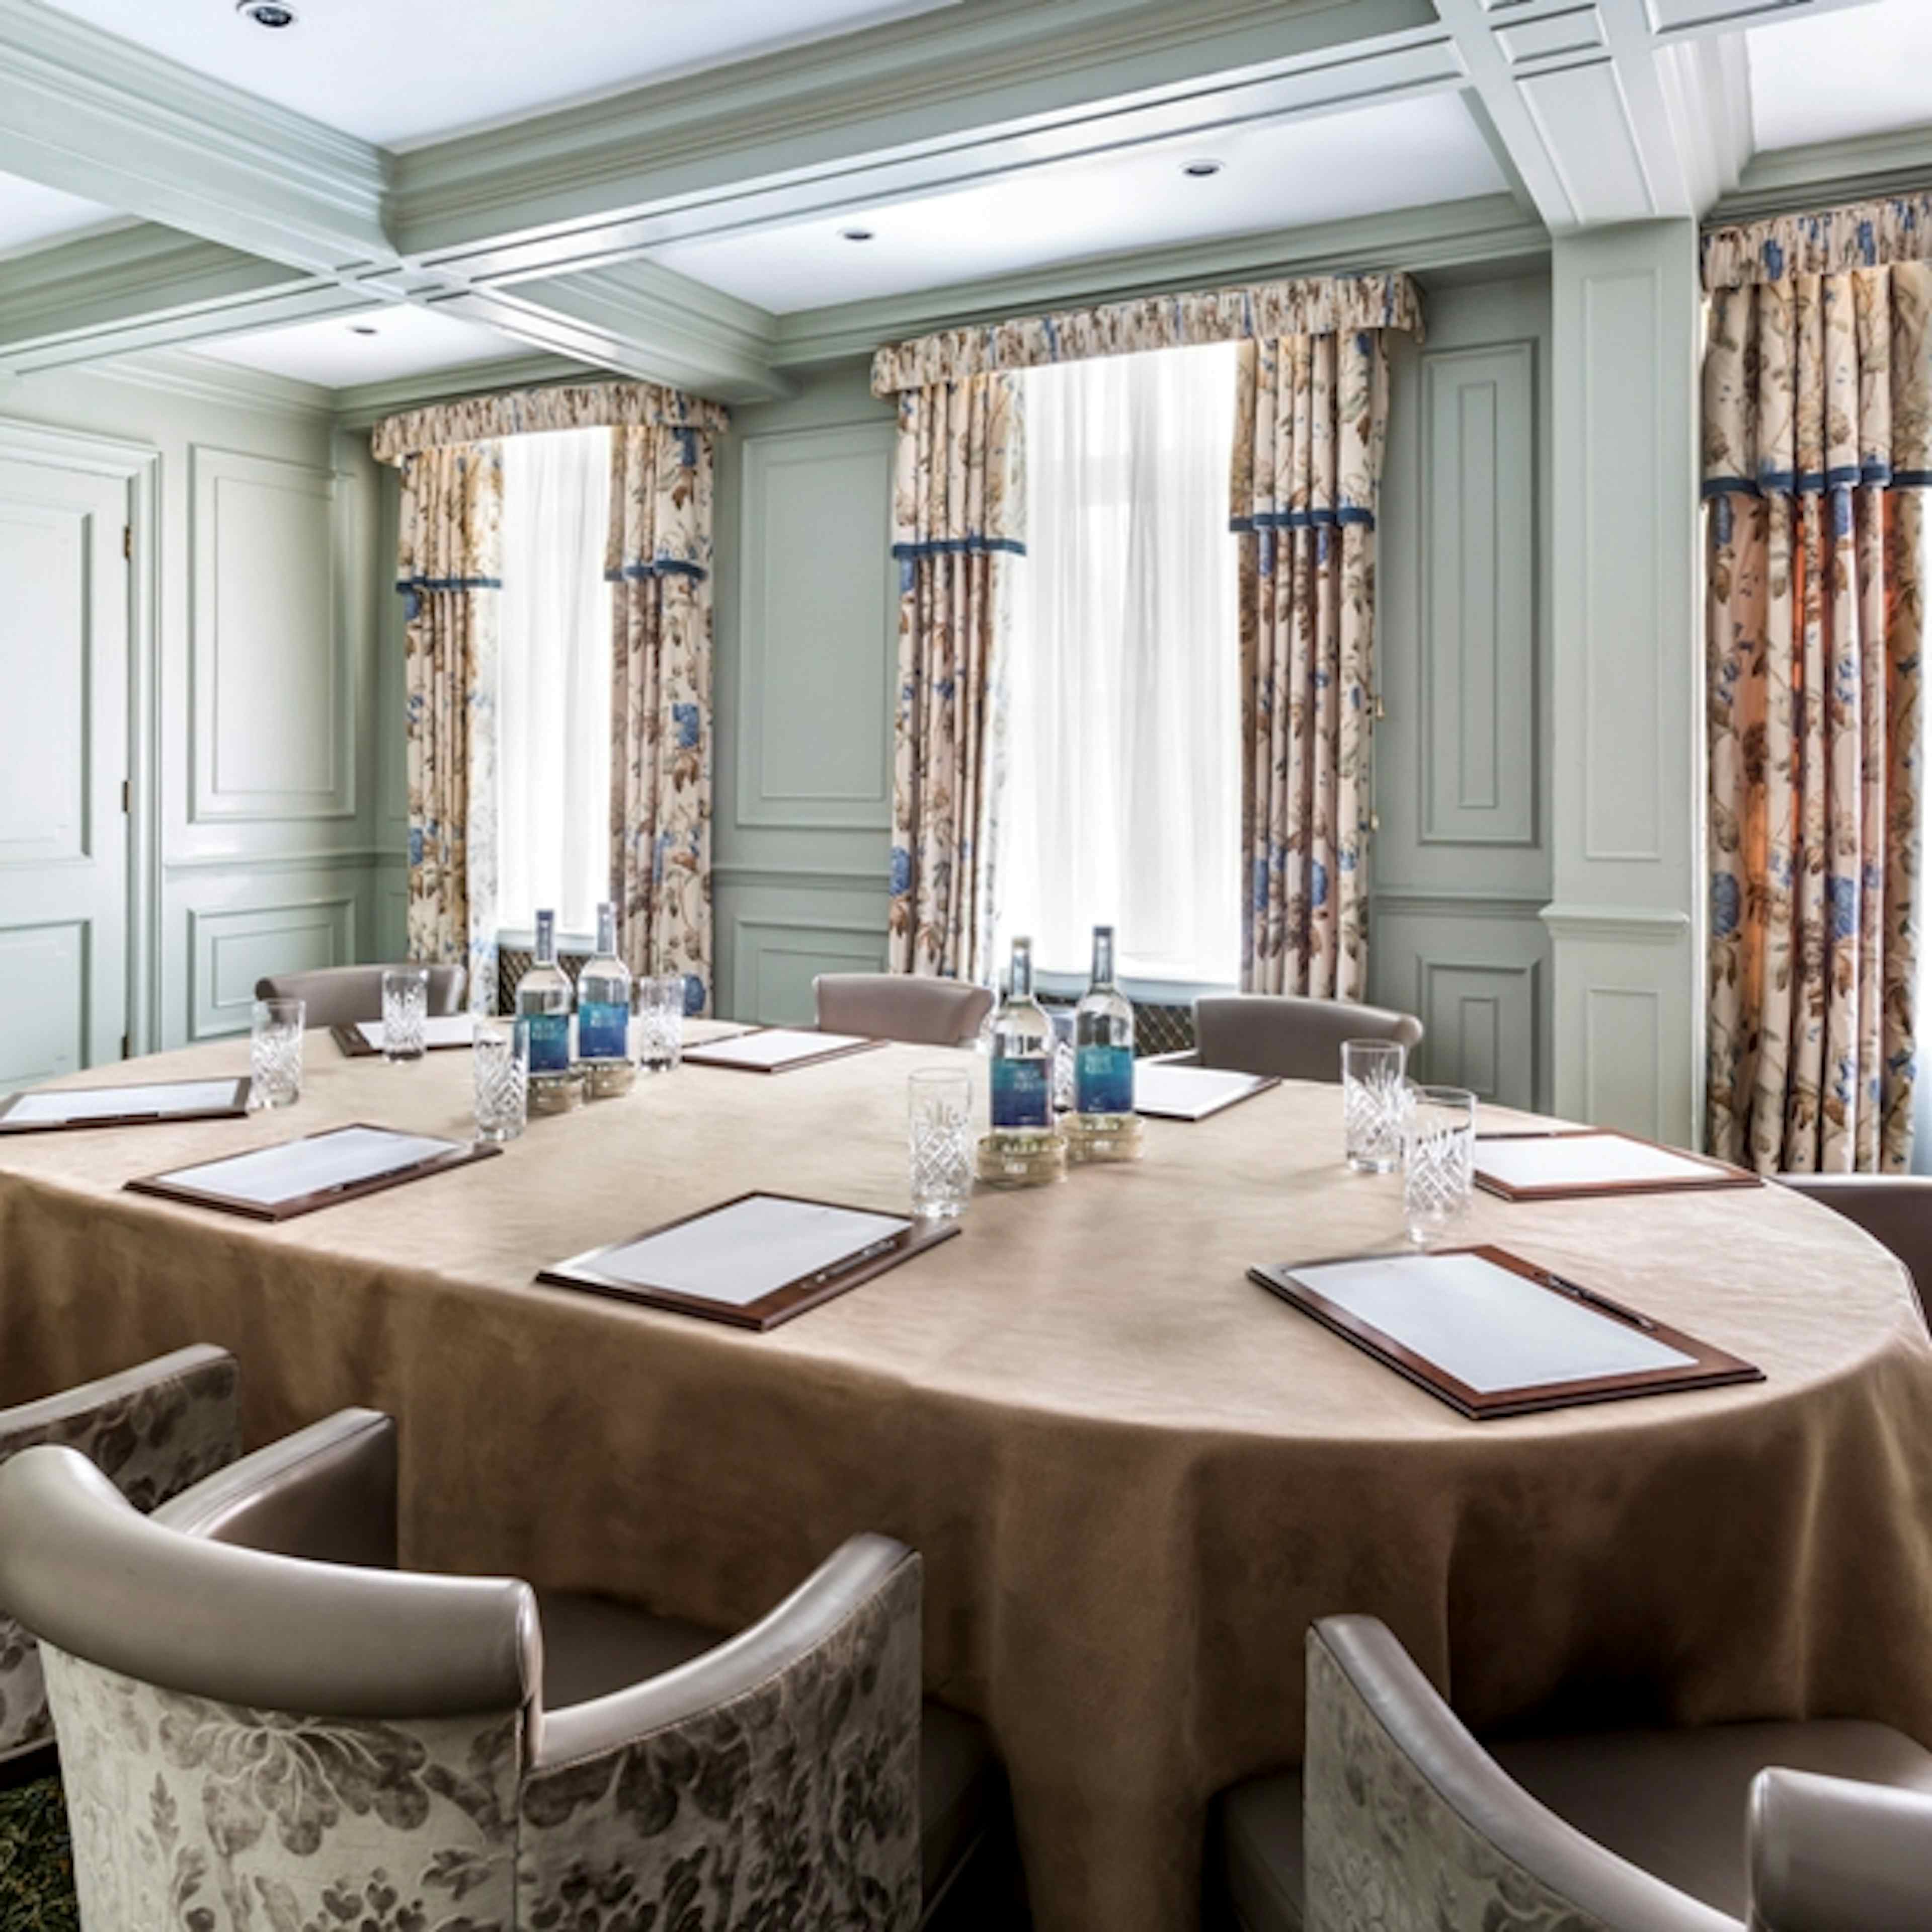 The Stafford London - The Argyll Room image 1